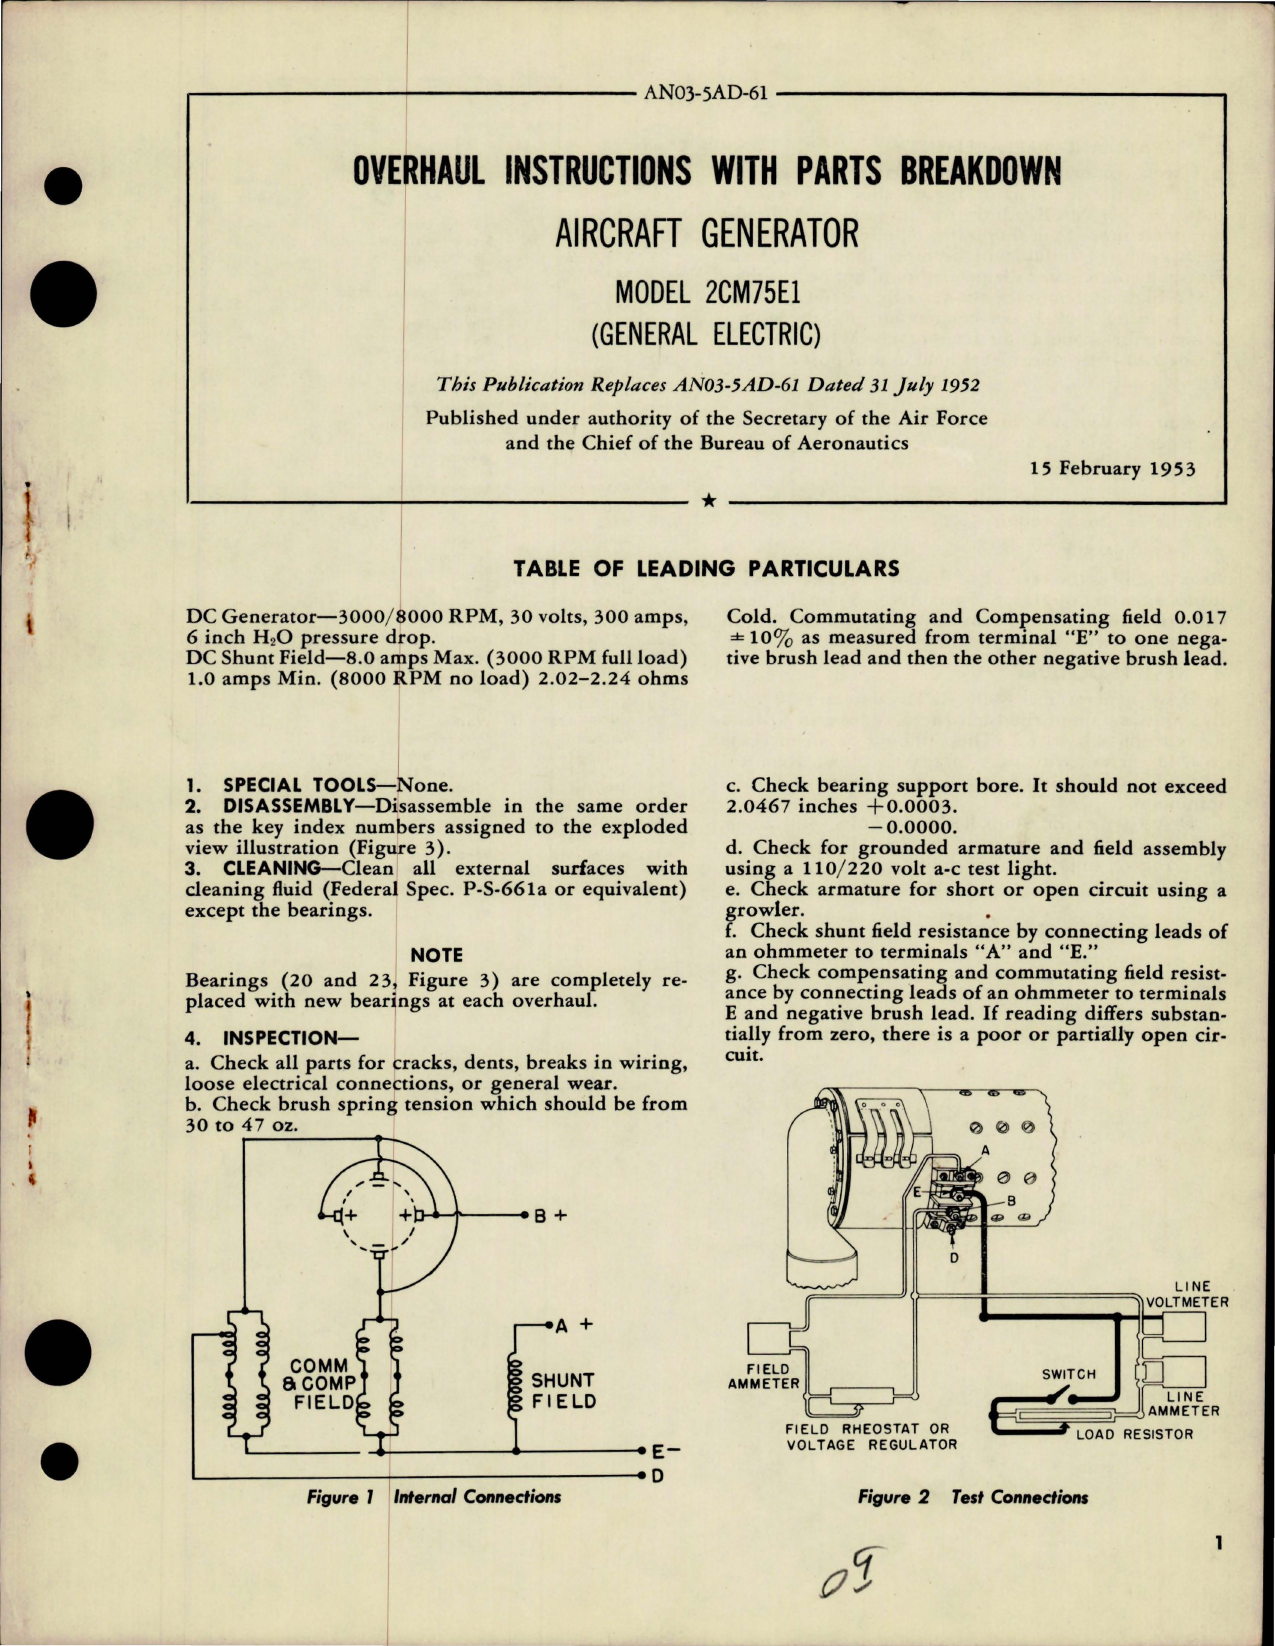 Sample page 1 from AirCorps Library document: Overhaul Instructions with Parts Breakdown for Aircraft Generator - Model 2CM75E1 